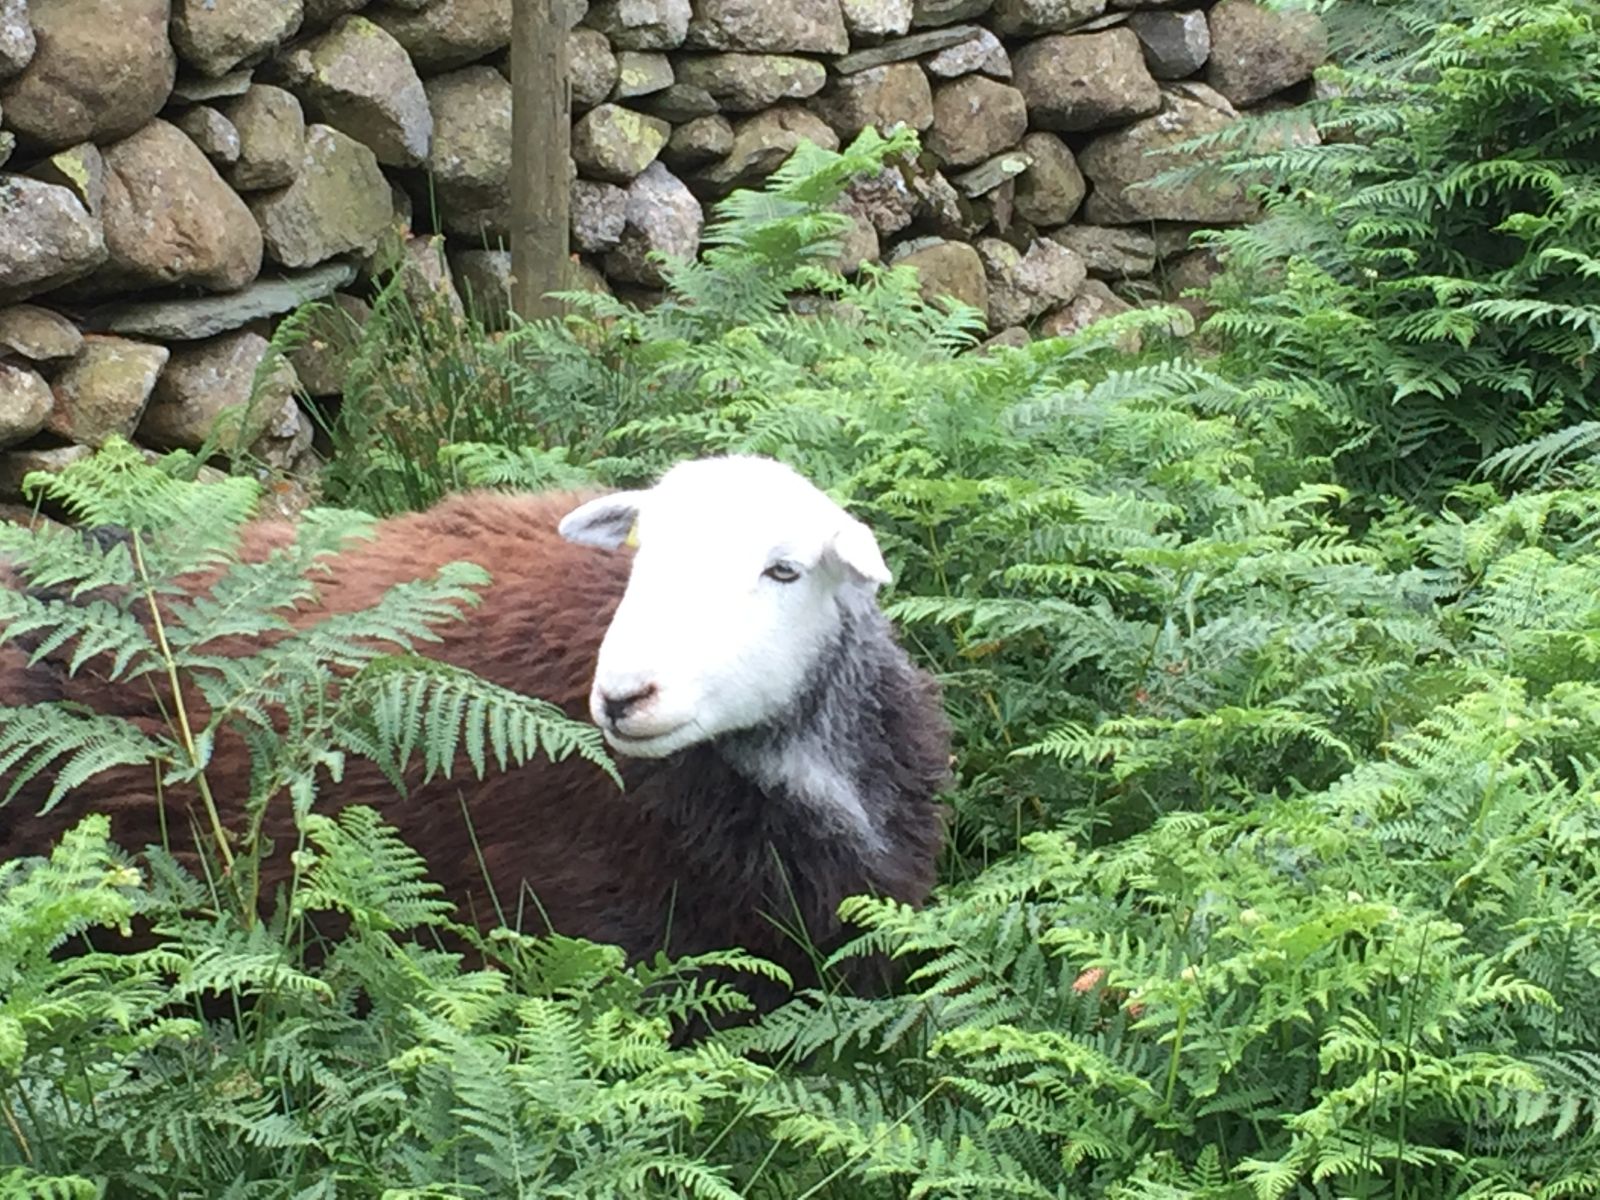 White faced sheep looking a little lost in the bracken as they contemplate a new shelter made from railway sleepers. Railwaysleepers.com